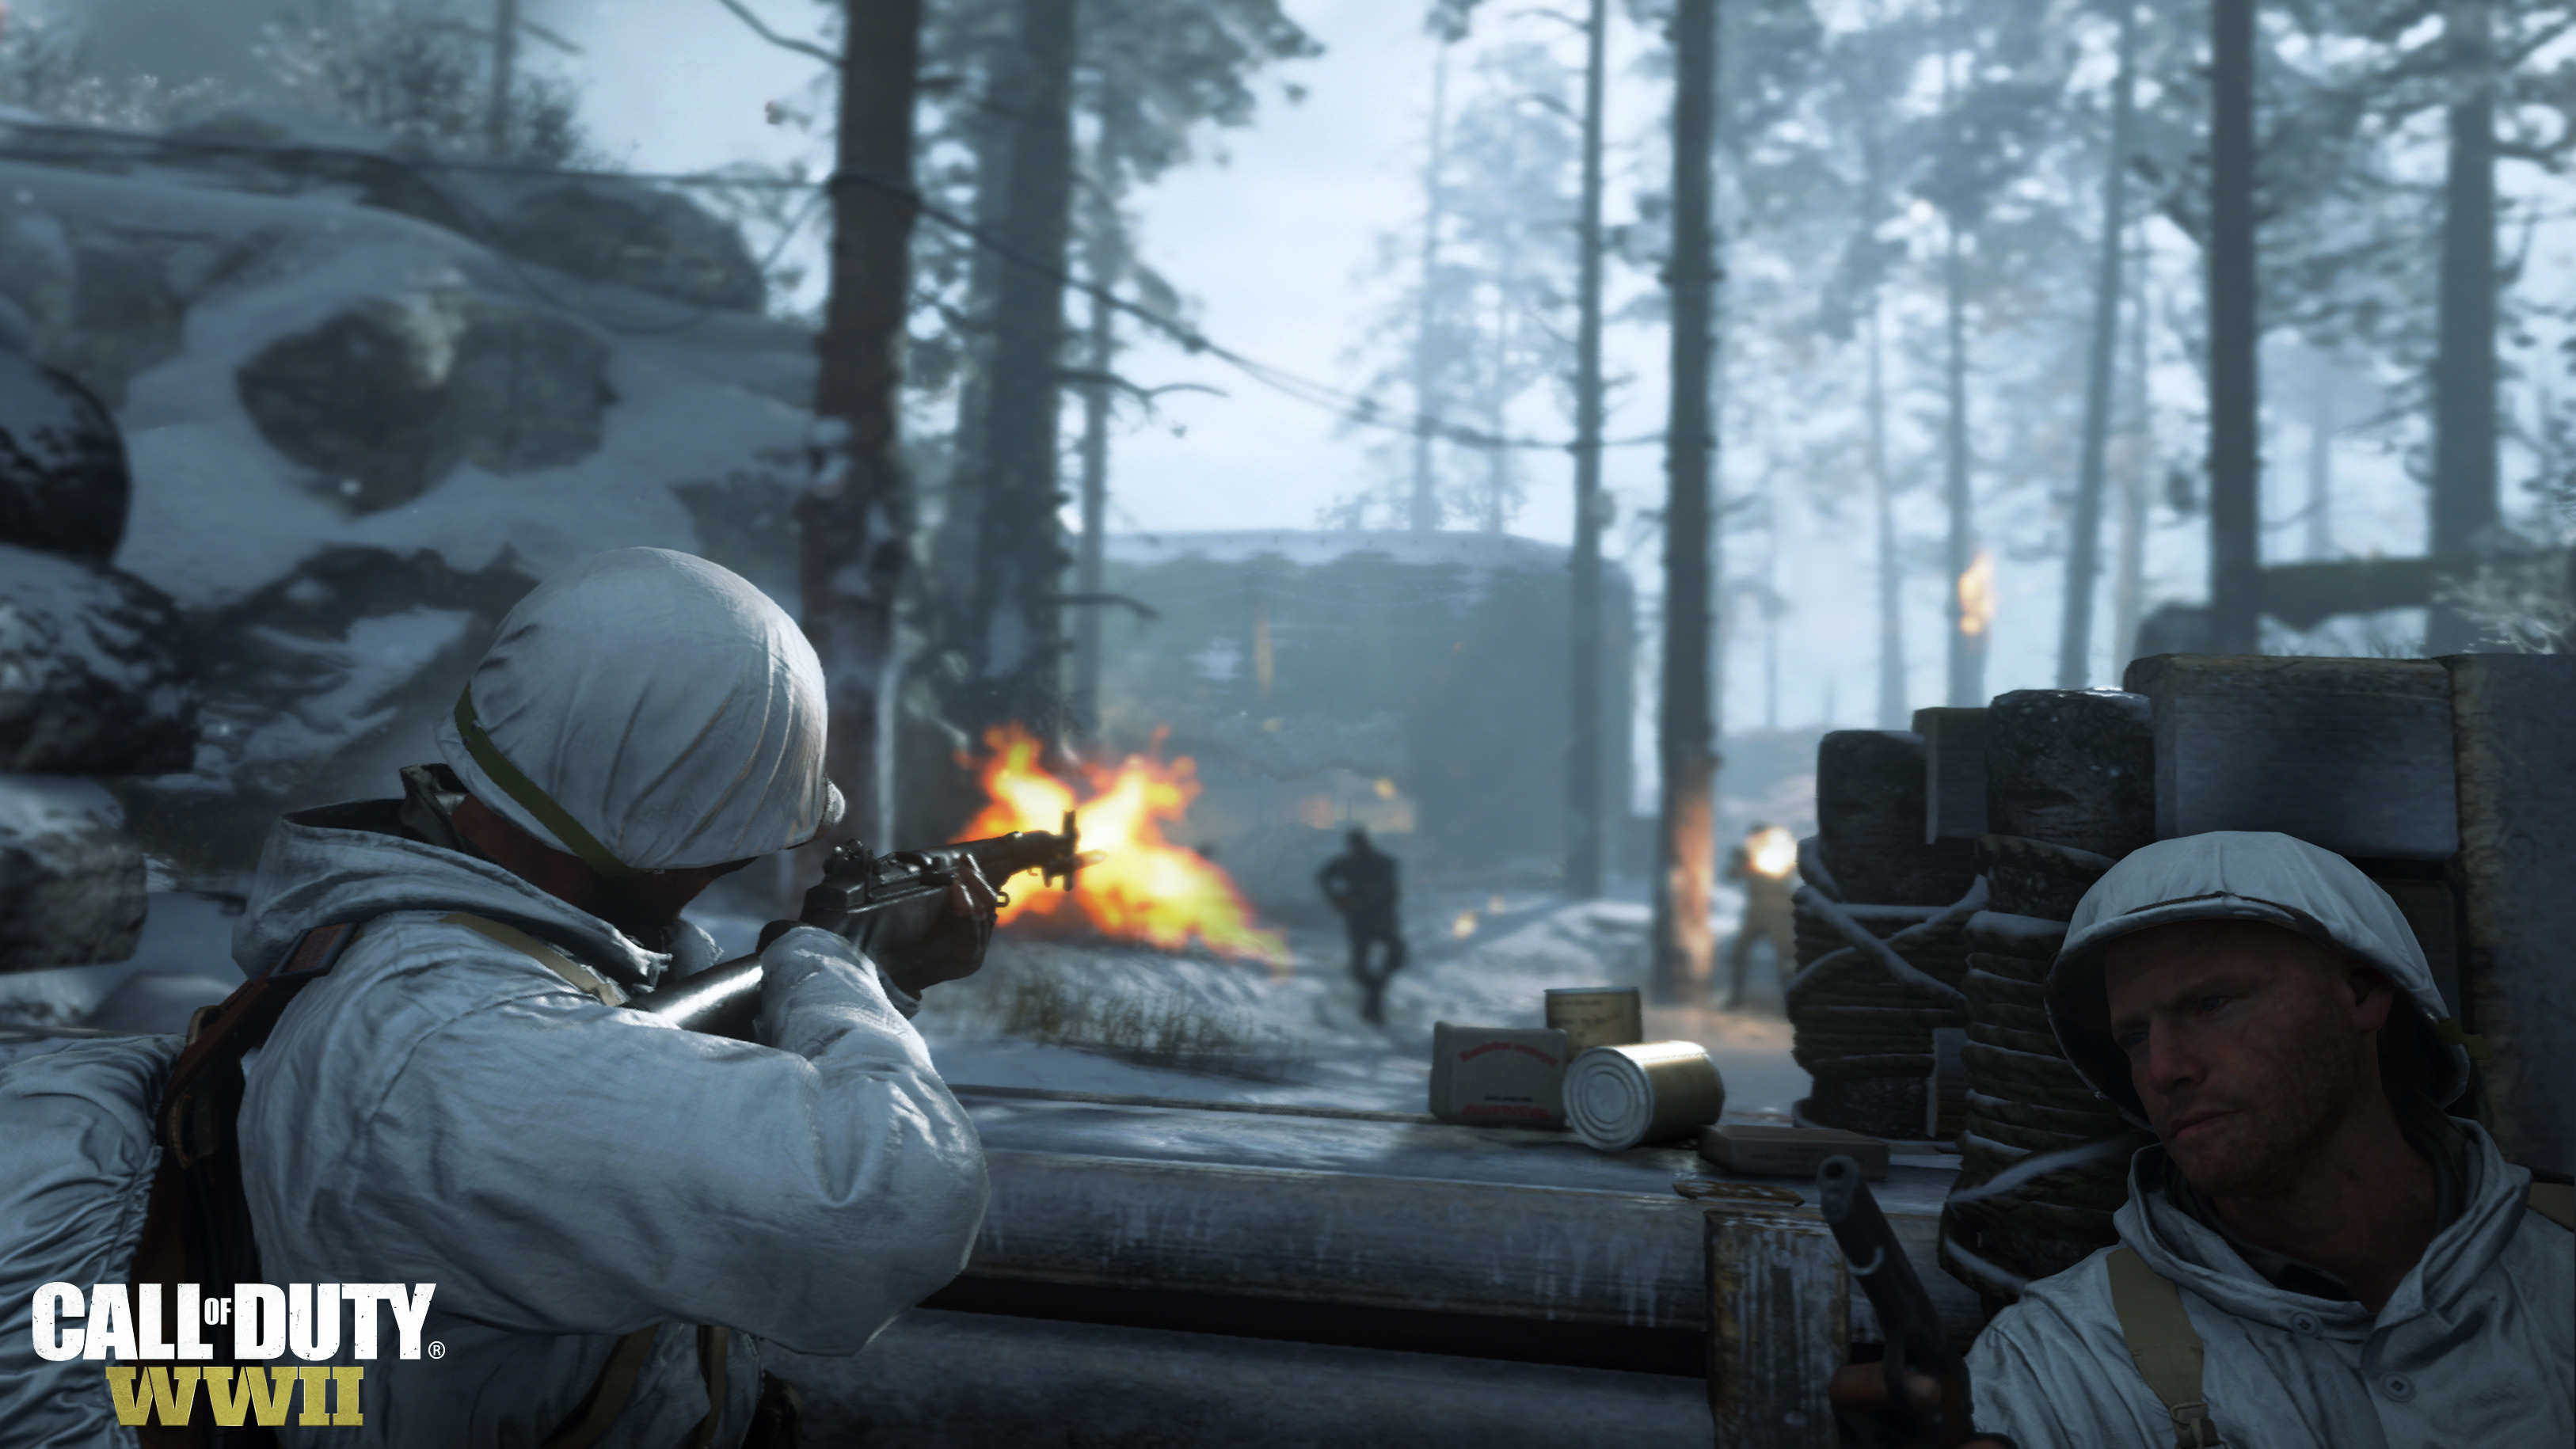 Play Call Of Duty: WW2 Multiplayer Free On PC Right Now - GameSpot